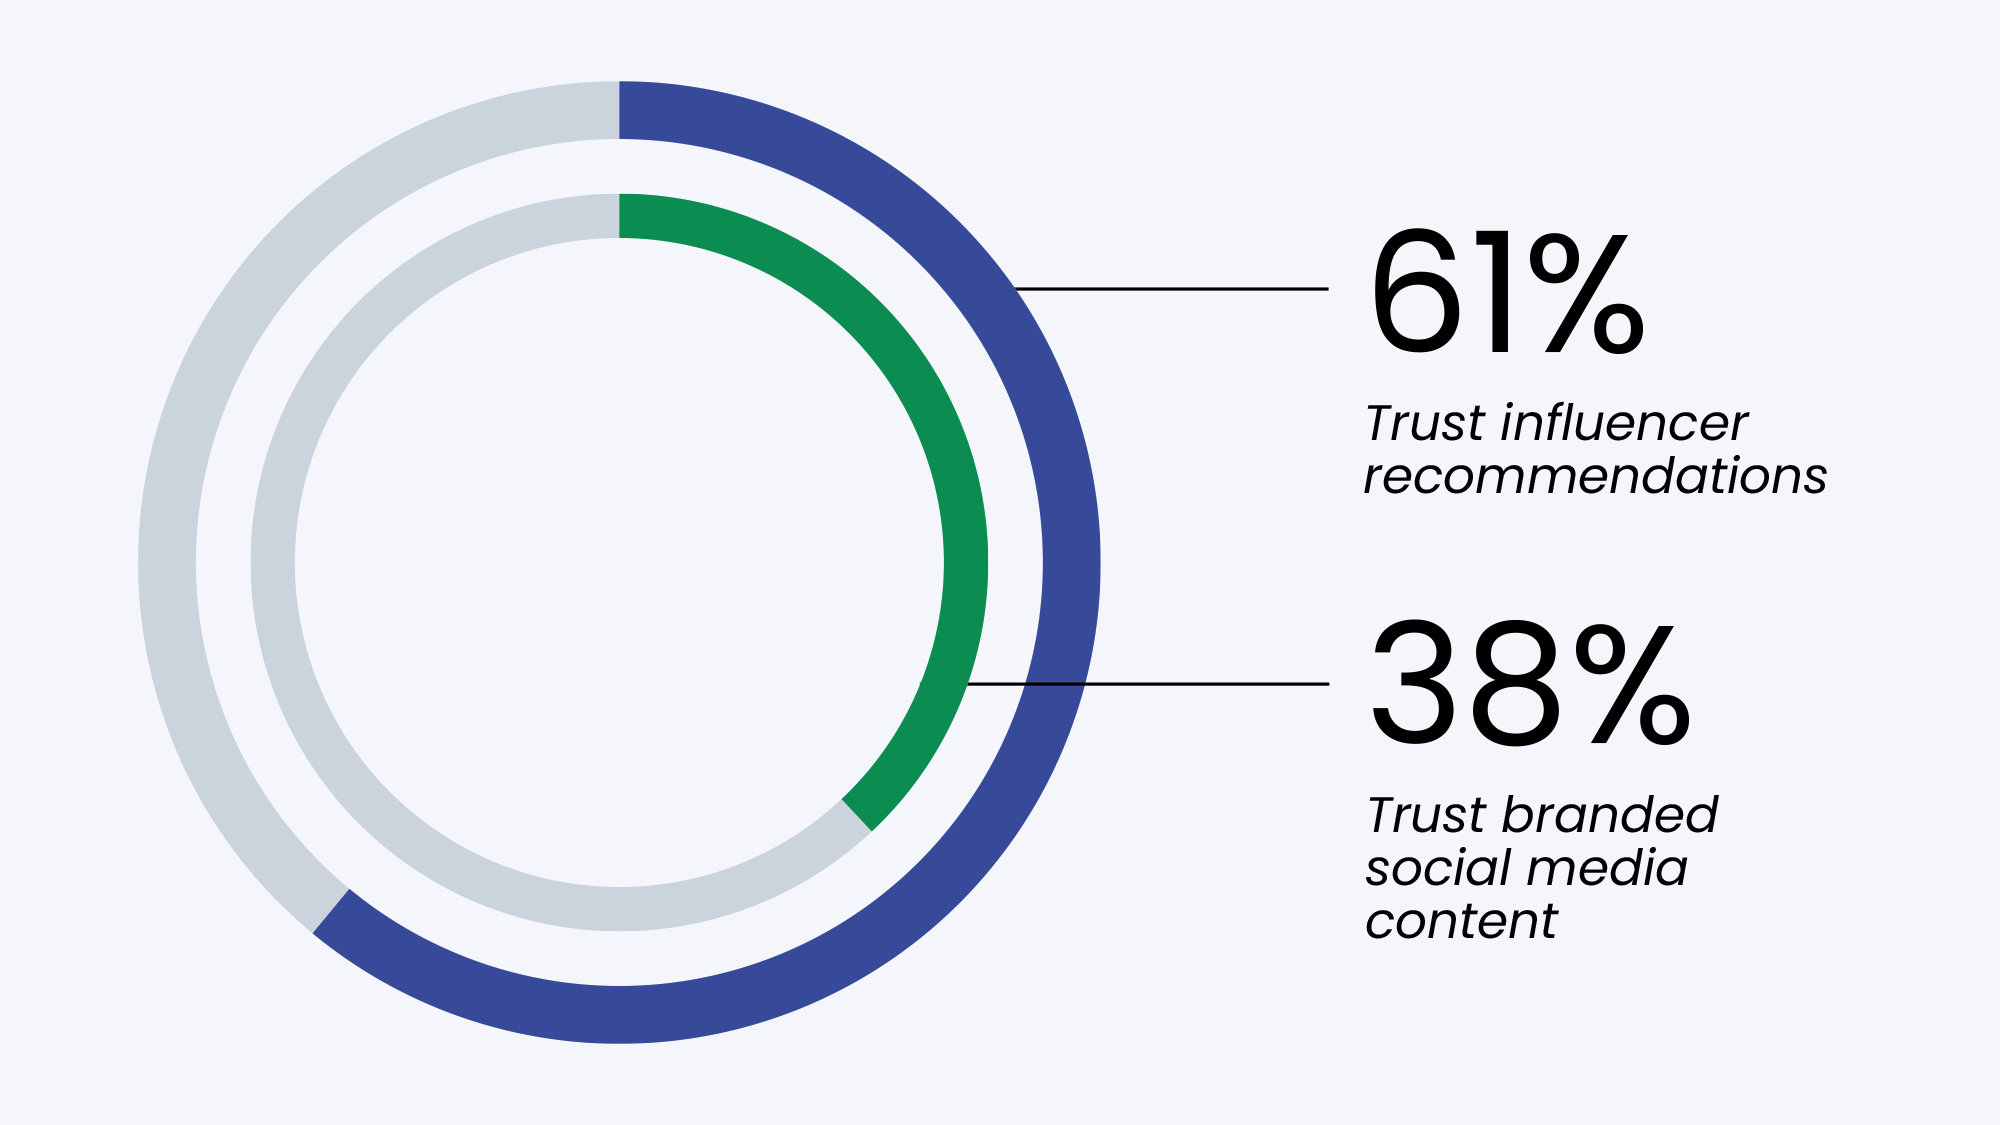 61% trust influencer recommendations